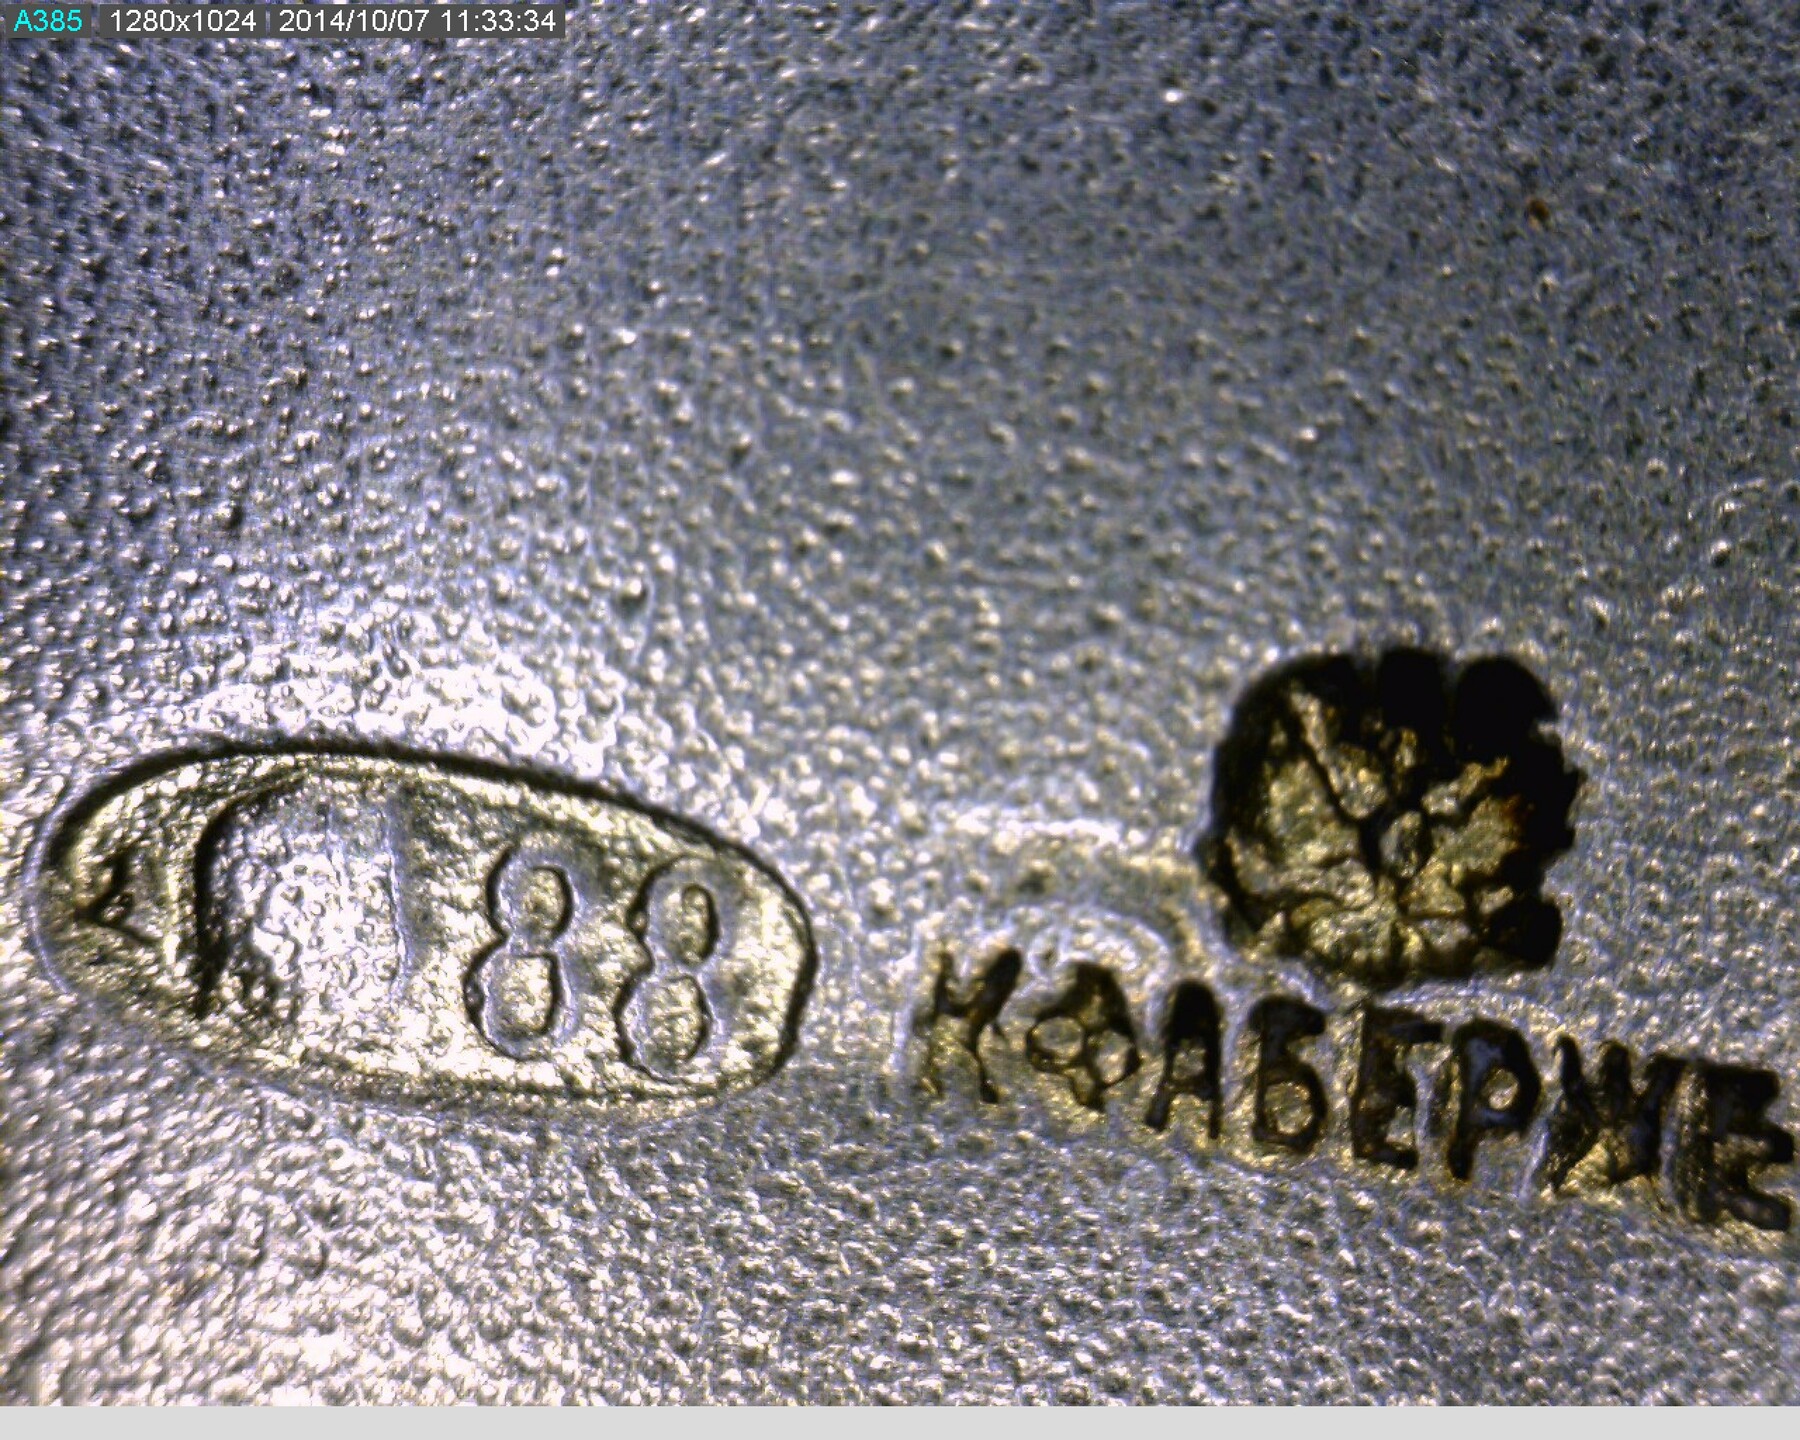 MARK OF FABERGÉ IN CYRILLIC BENEATH THE IMPERIAL WARRANT, MAKER’S MARK OF FEODOR RÜCKERT IN CYRILLIC, MOSCOW, 1908–1917, 88 STANDARD, SCRATCHED INVENTORY NUMBER 22323